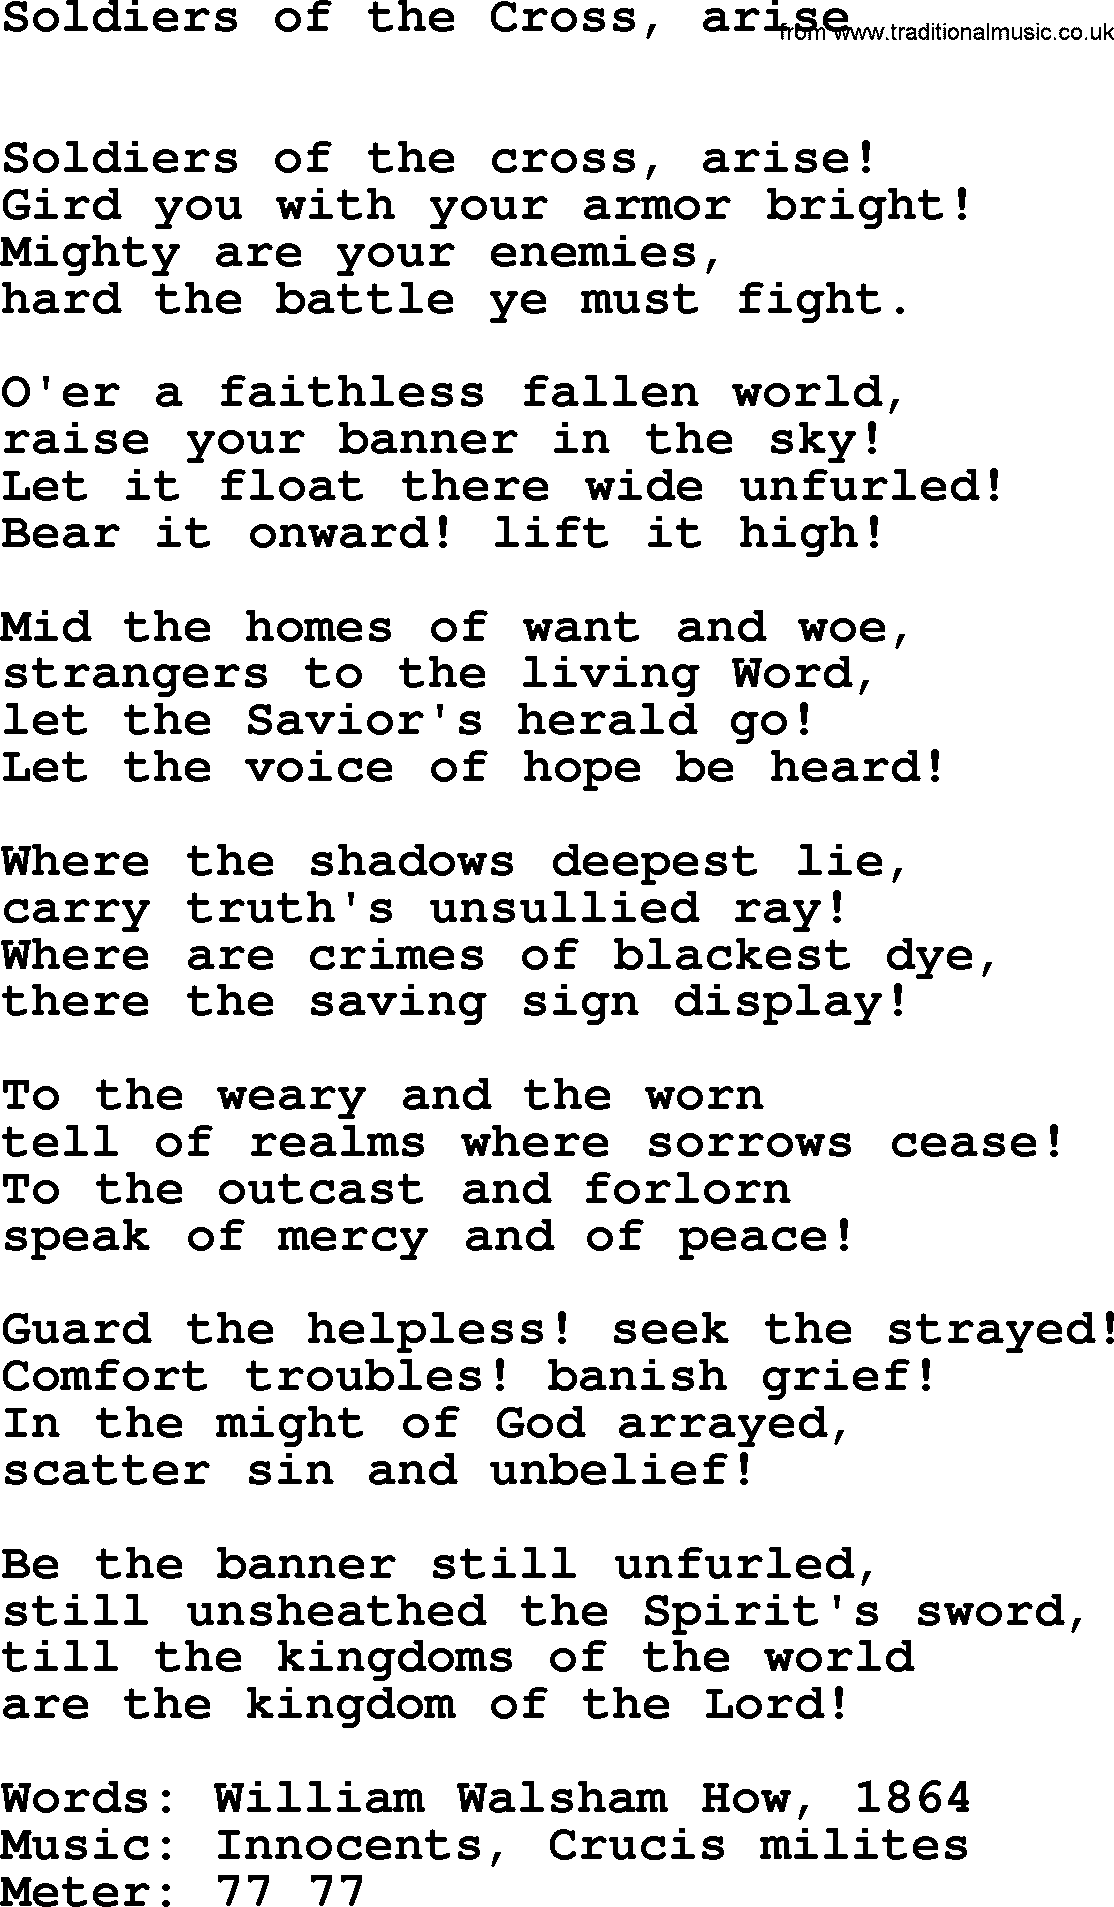 Book of Common Praise Hymn: Soldiers Of The Cross, Arise.txt lyrics with midi music